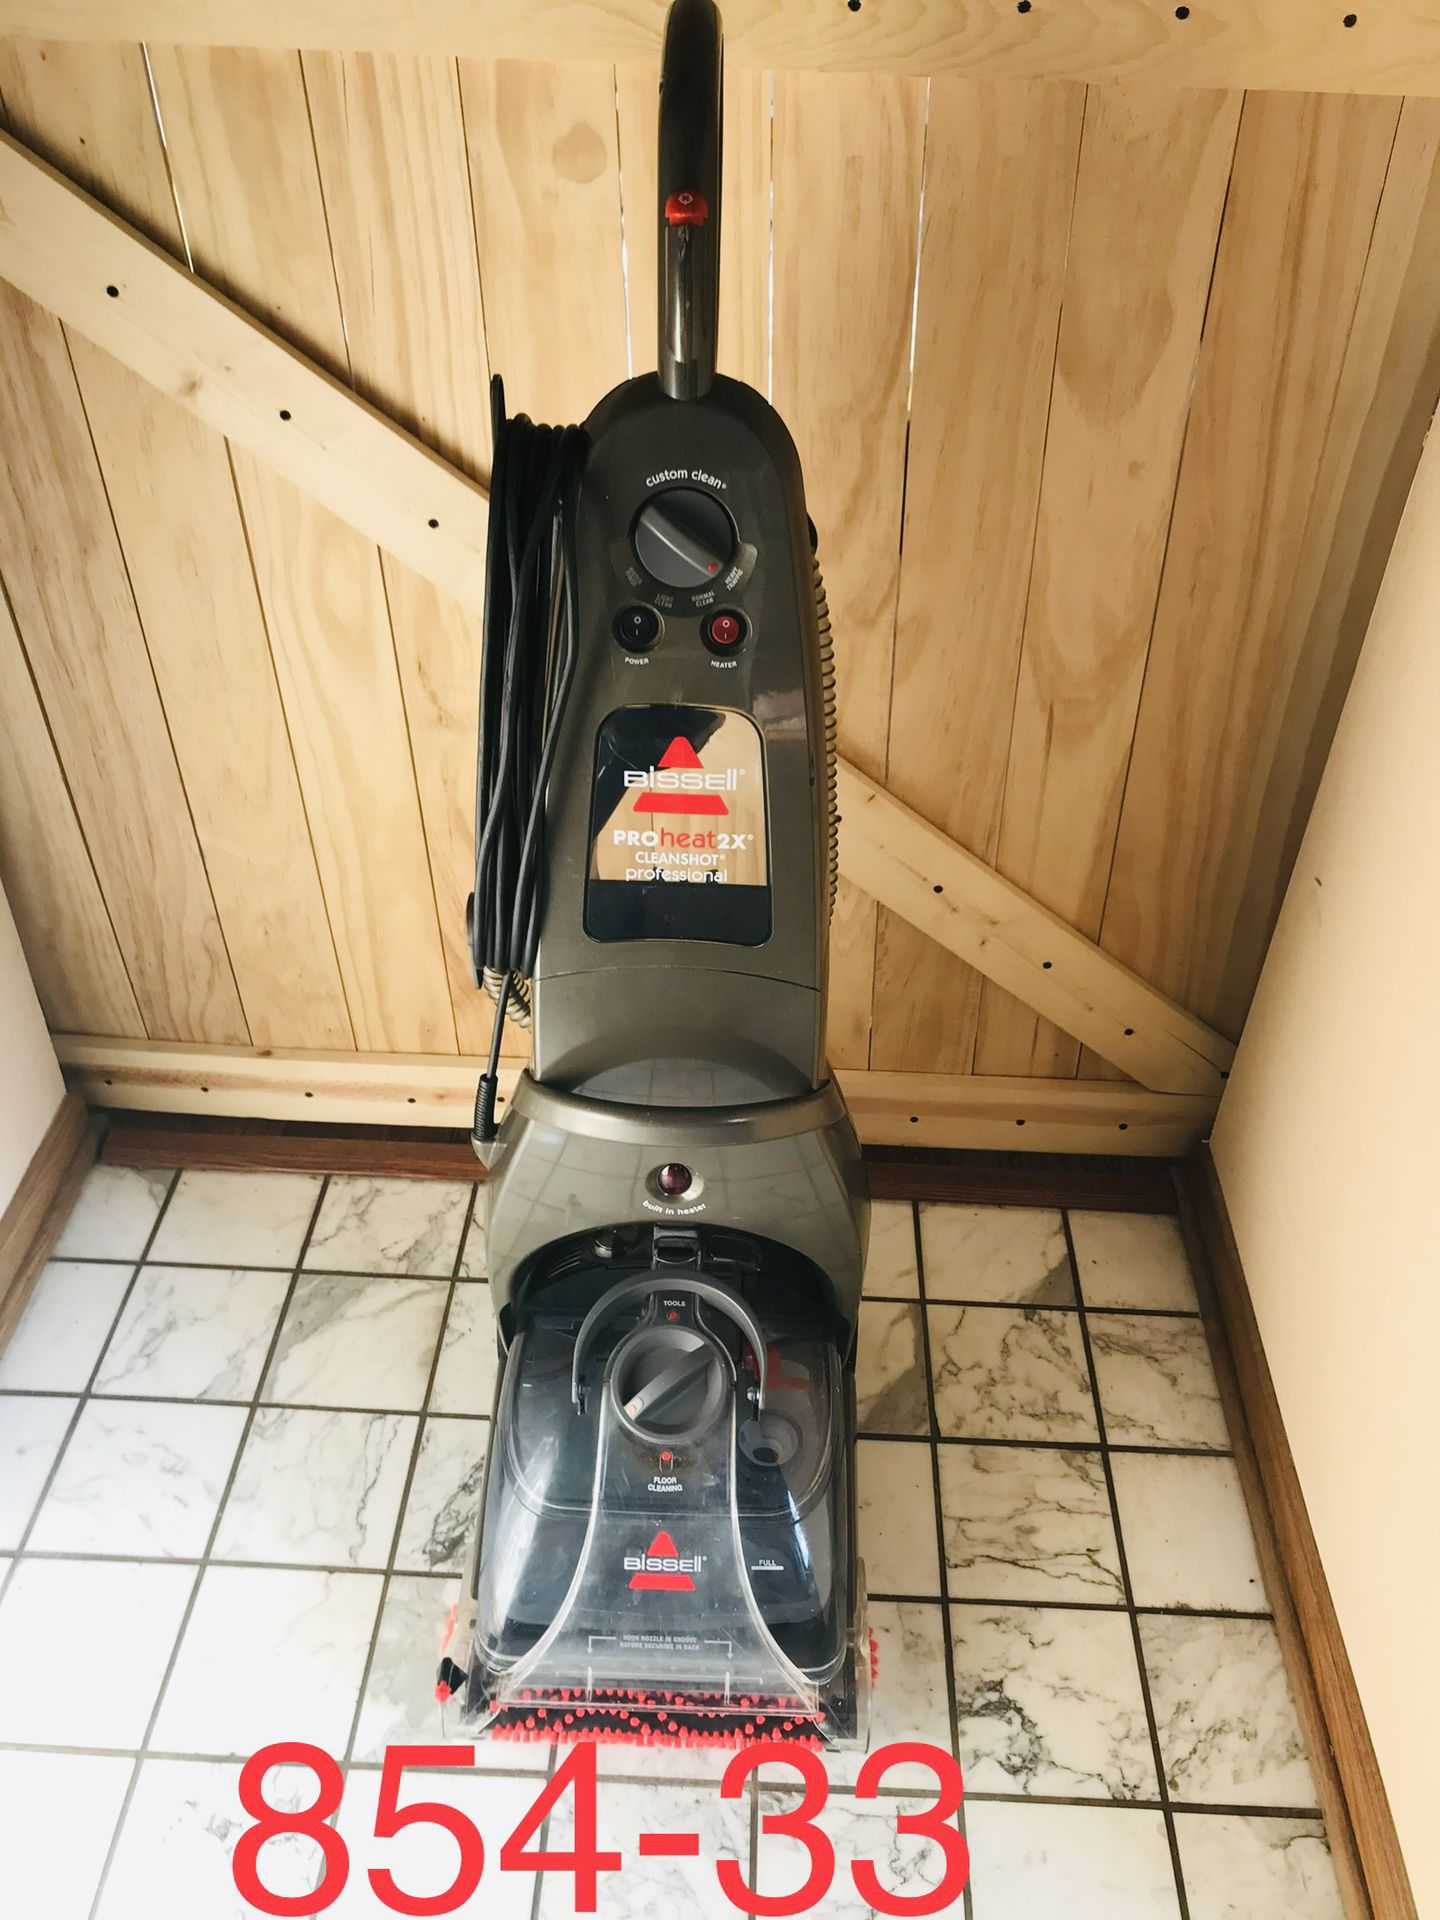 Bissell Pro Heat 2x Clean Shot Professional Carpet Cleaner